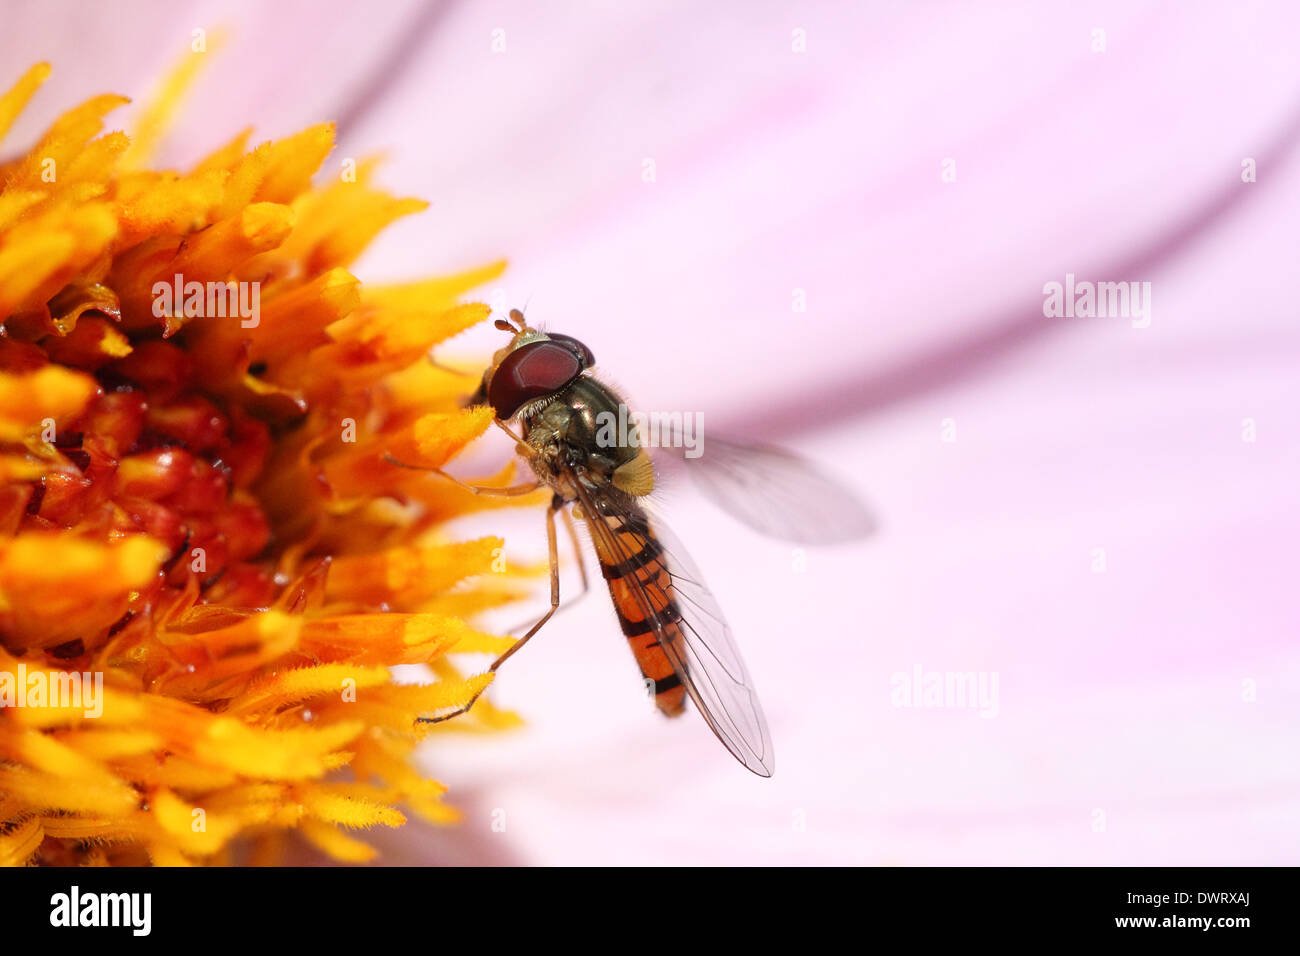 Wasp, Insect Flower, Macro, Close-up, Nature Stock Photo